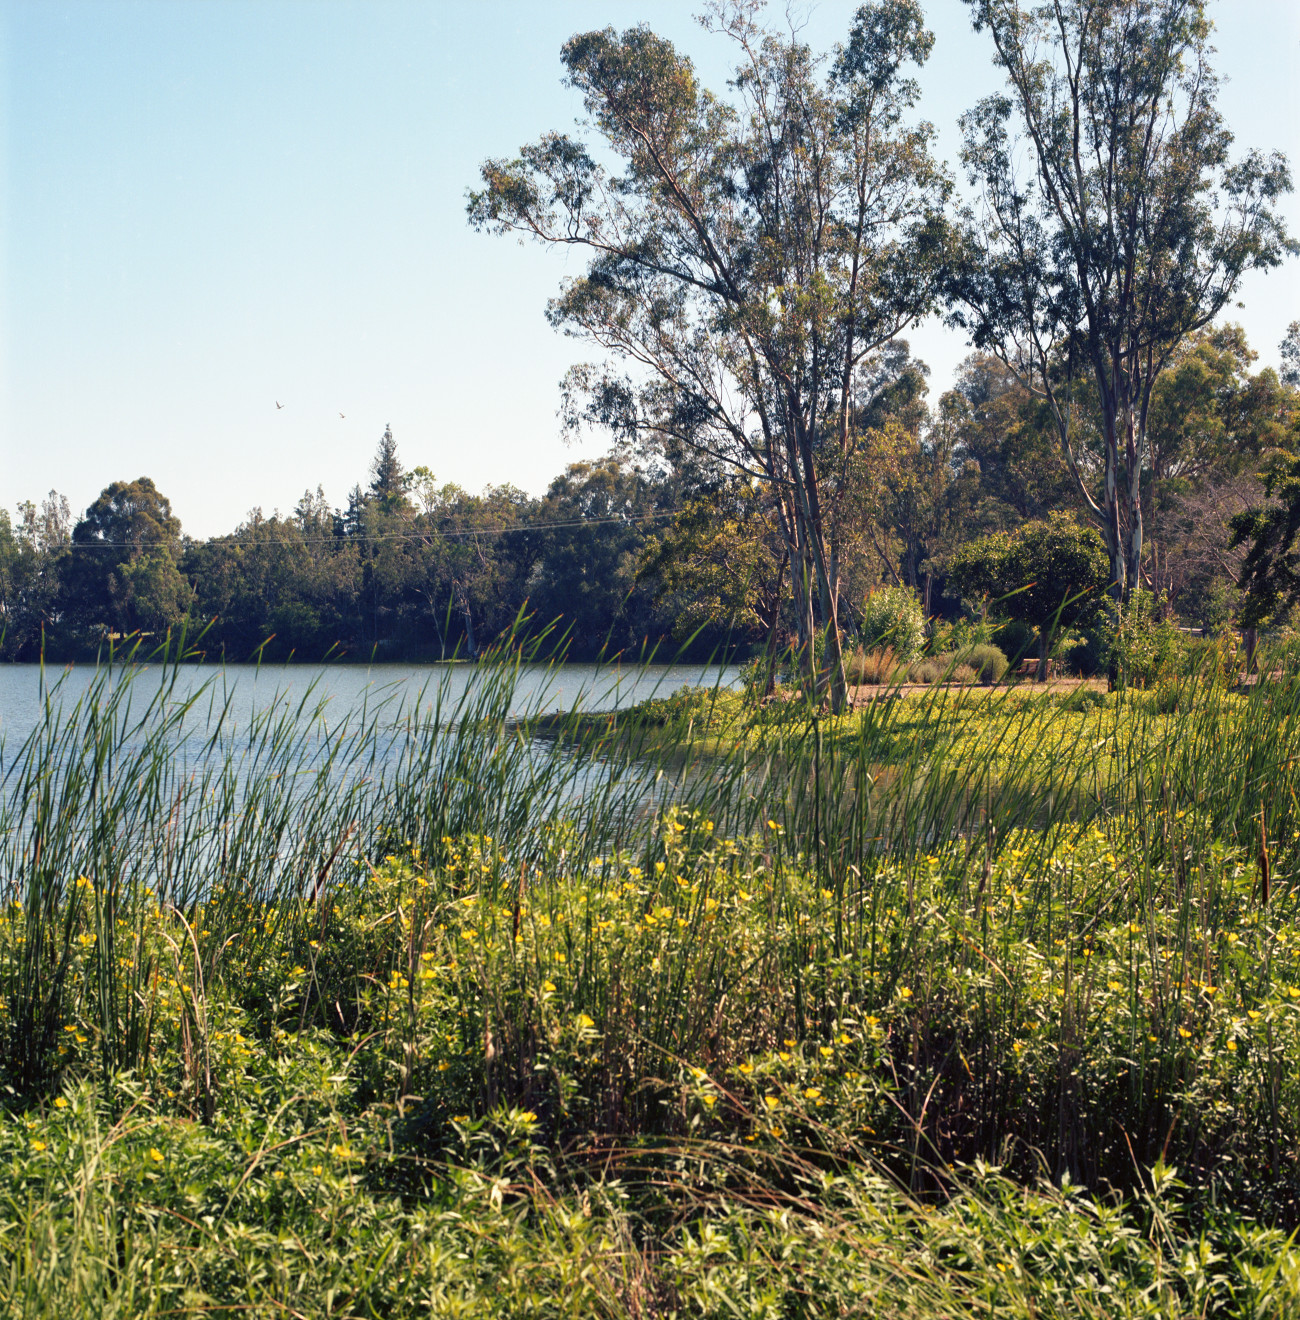 View down the shore of Vasona Lake. Reeds and shore grasses showing in the foreground; middle distance, a little peninsula with several eucalyptus rising from it; far distance, the far shore of the lake and the forest.